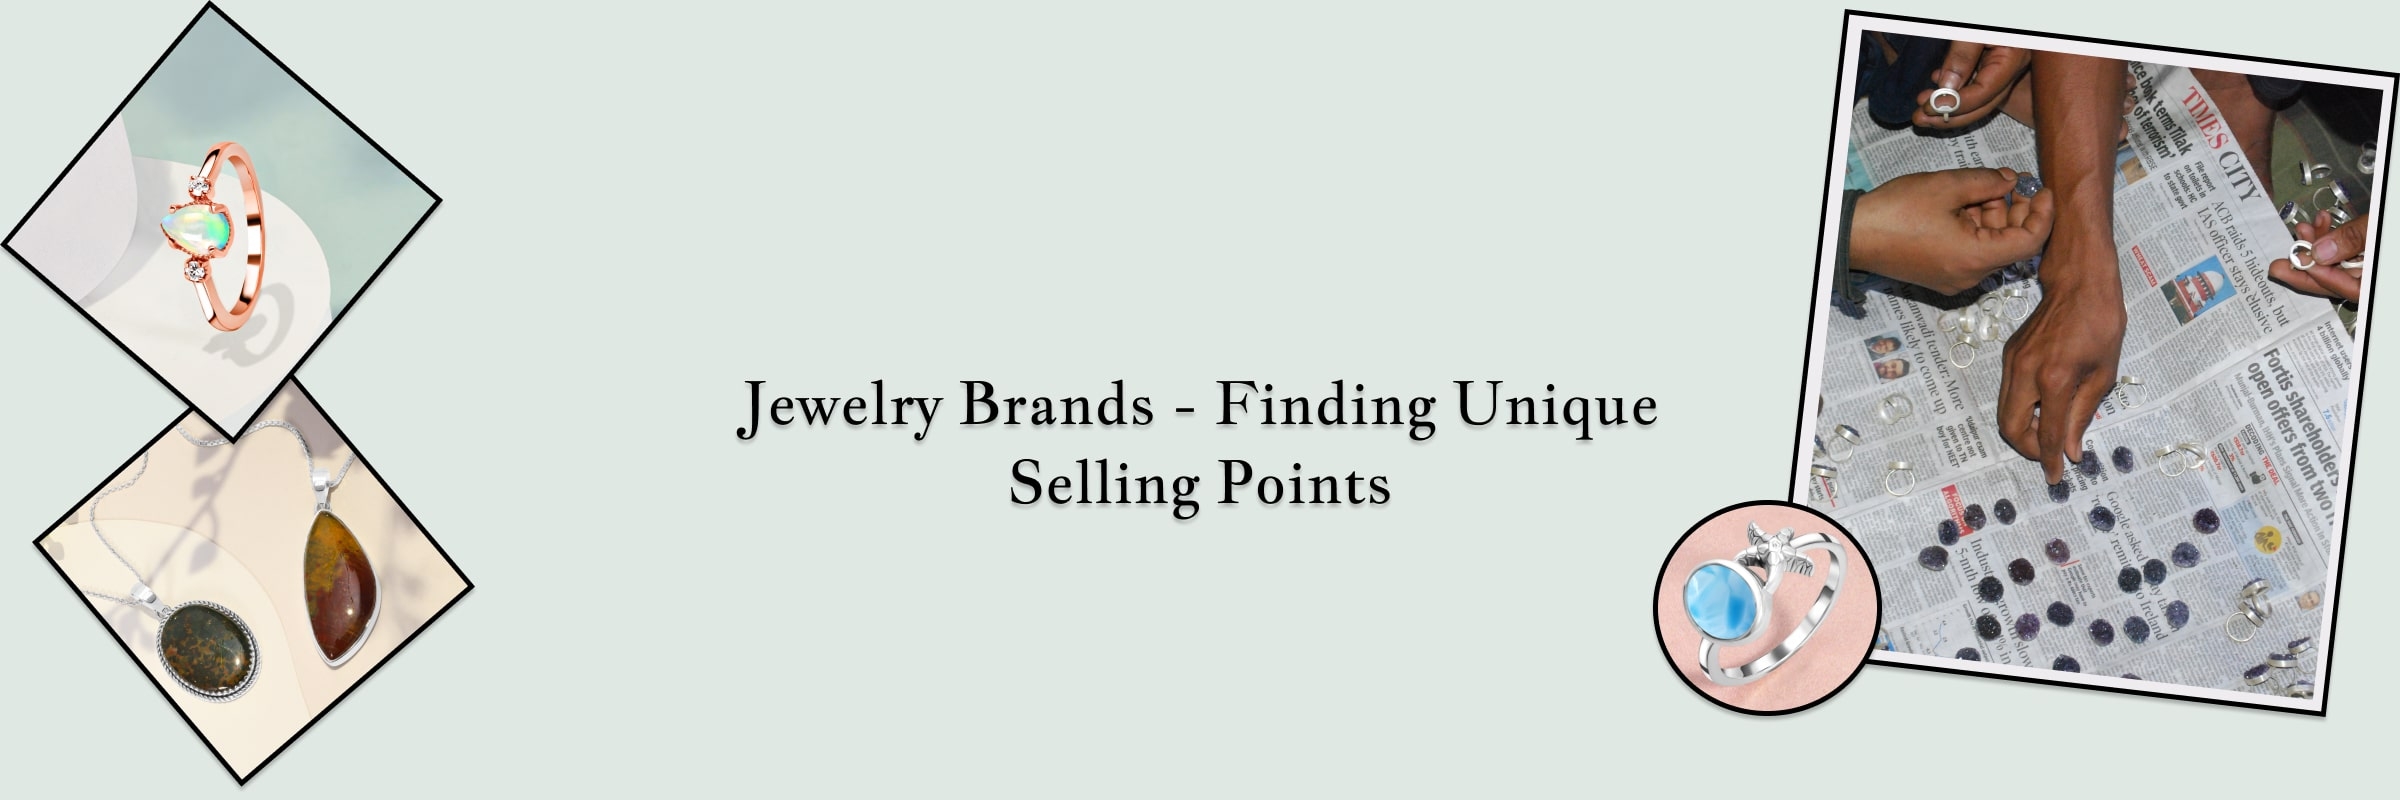 Why do Jewelry Brands need Unique Selling Points